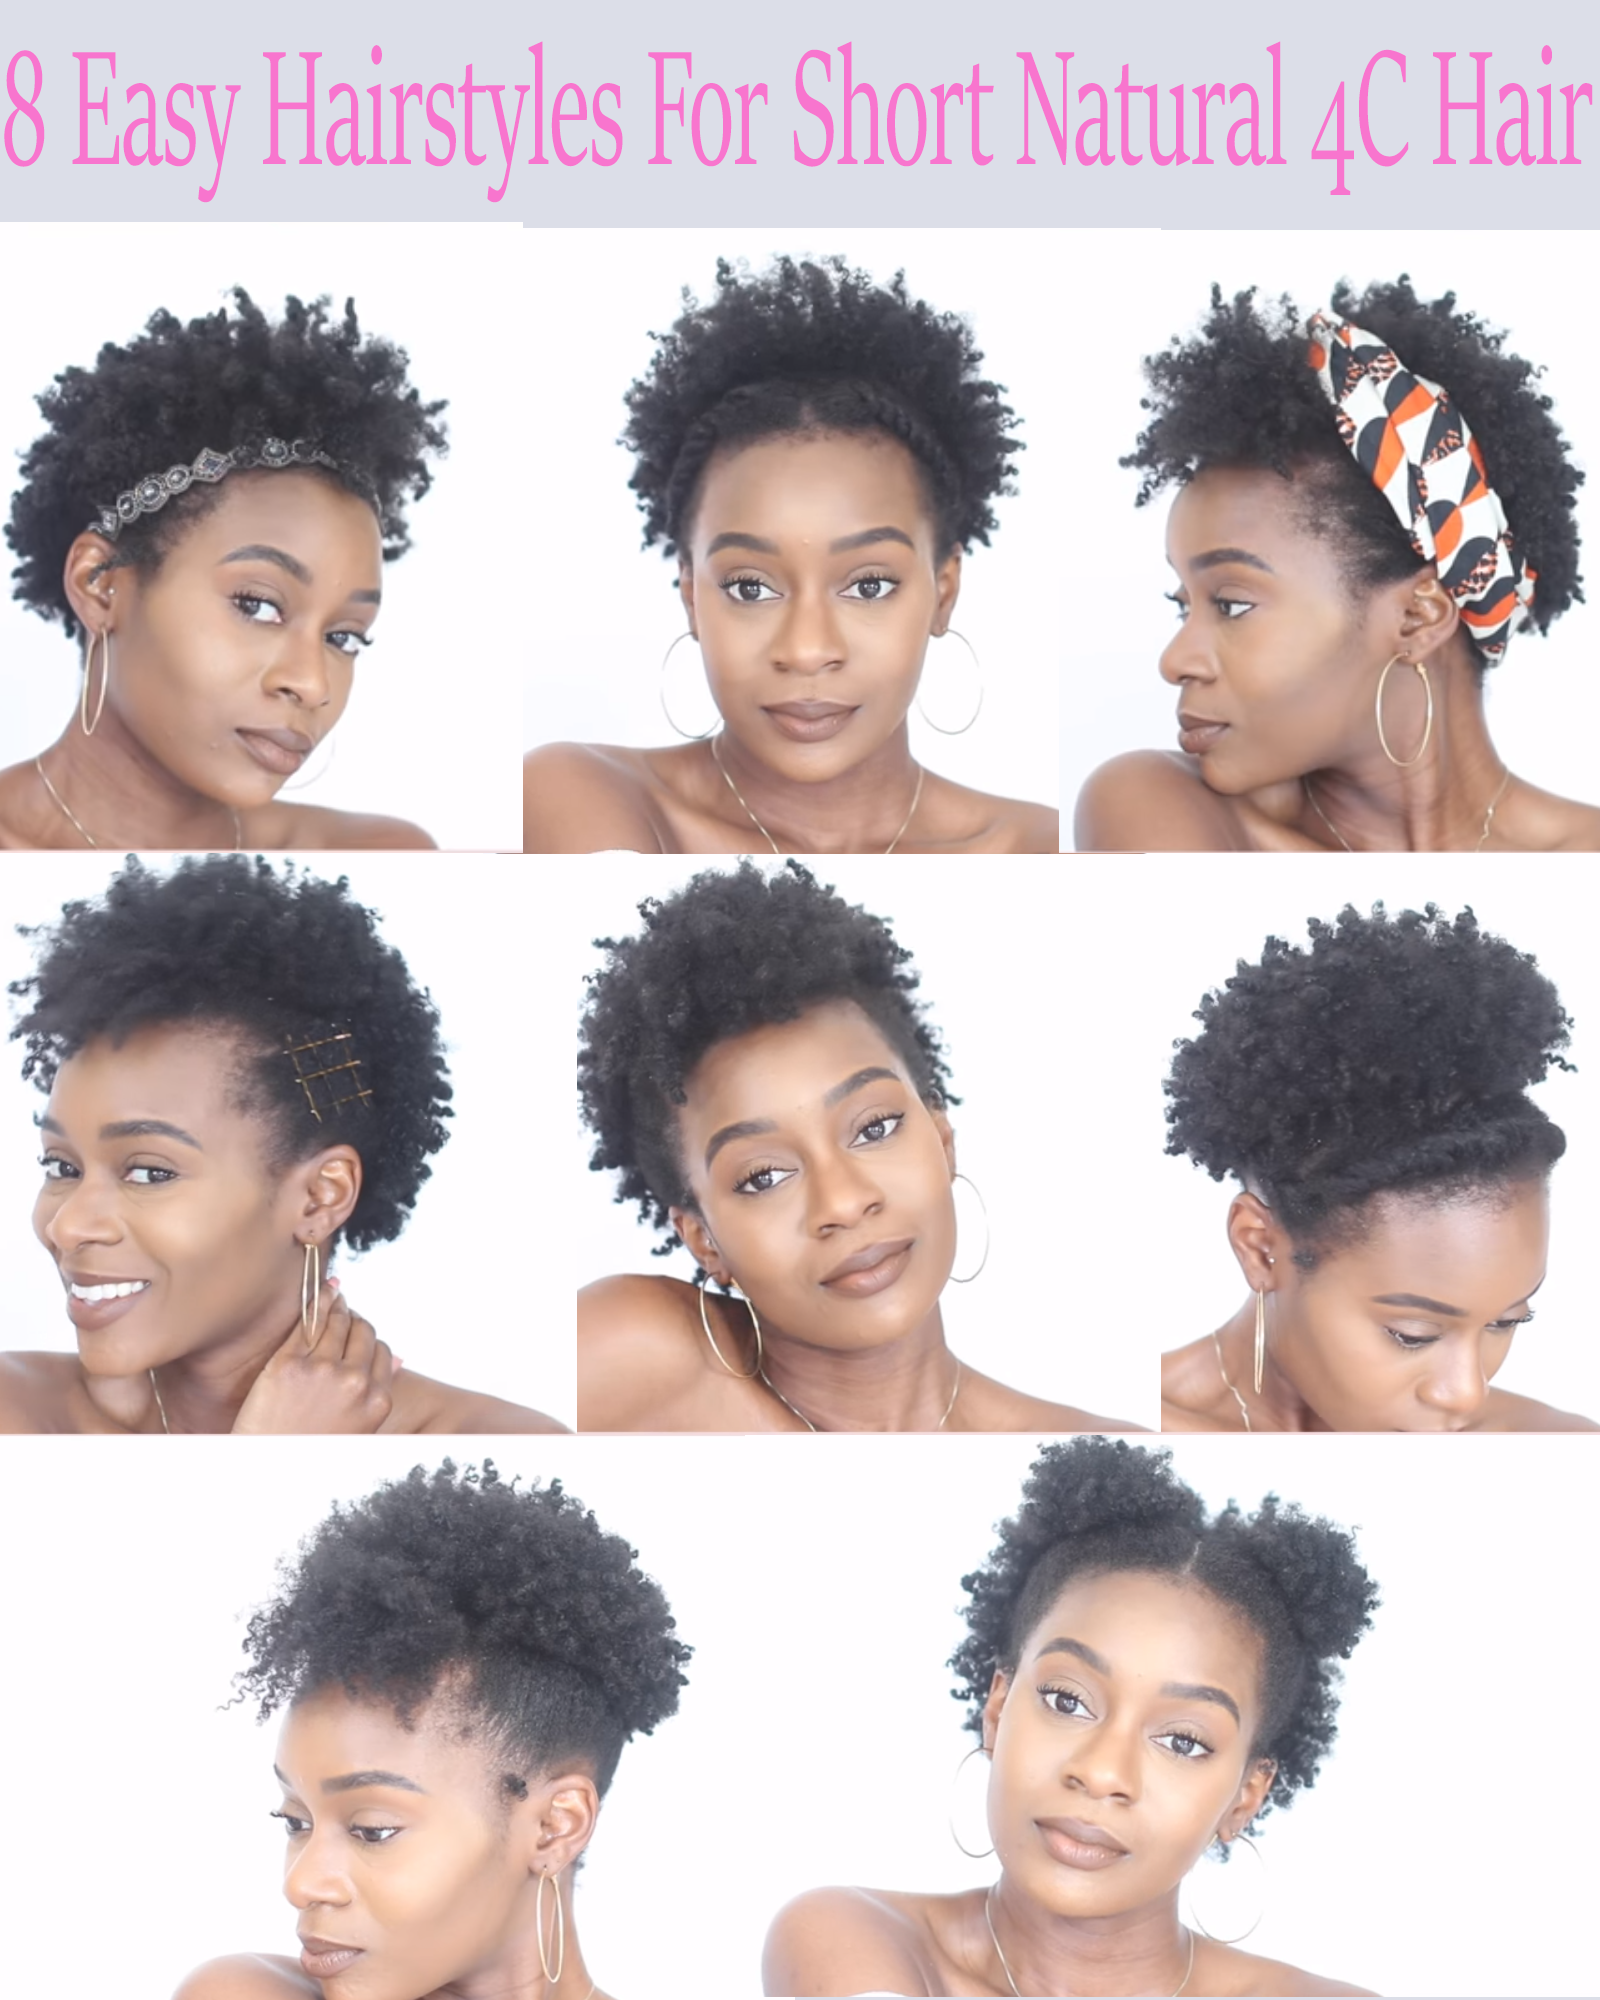 8 Easy Protective Hairstyles For Short Natural 4C Hair That Will Not Damage  Your Edges ⋆ African American Hairstyle Videos - AAHV